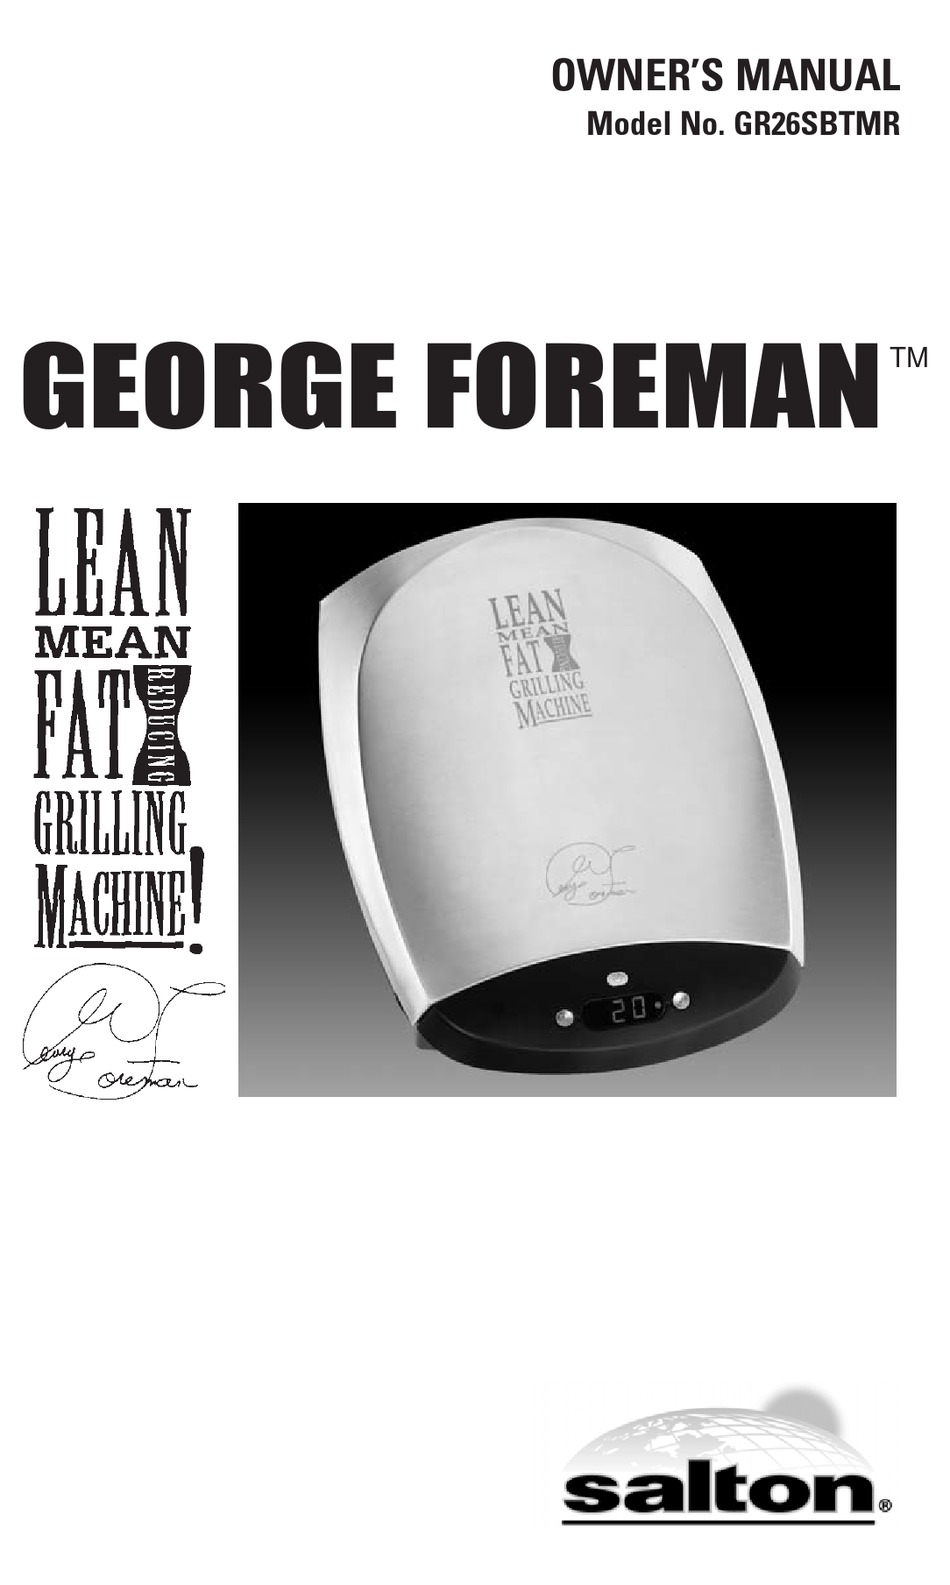 George foreman lean mean fat reducing grilling machine user manual Pin On My Posh Closet Picsonly